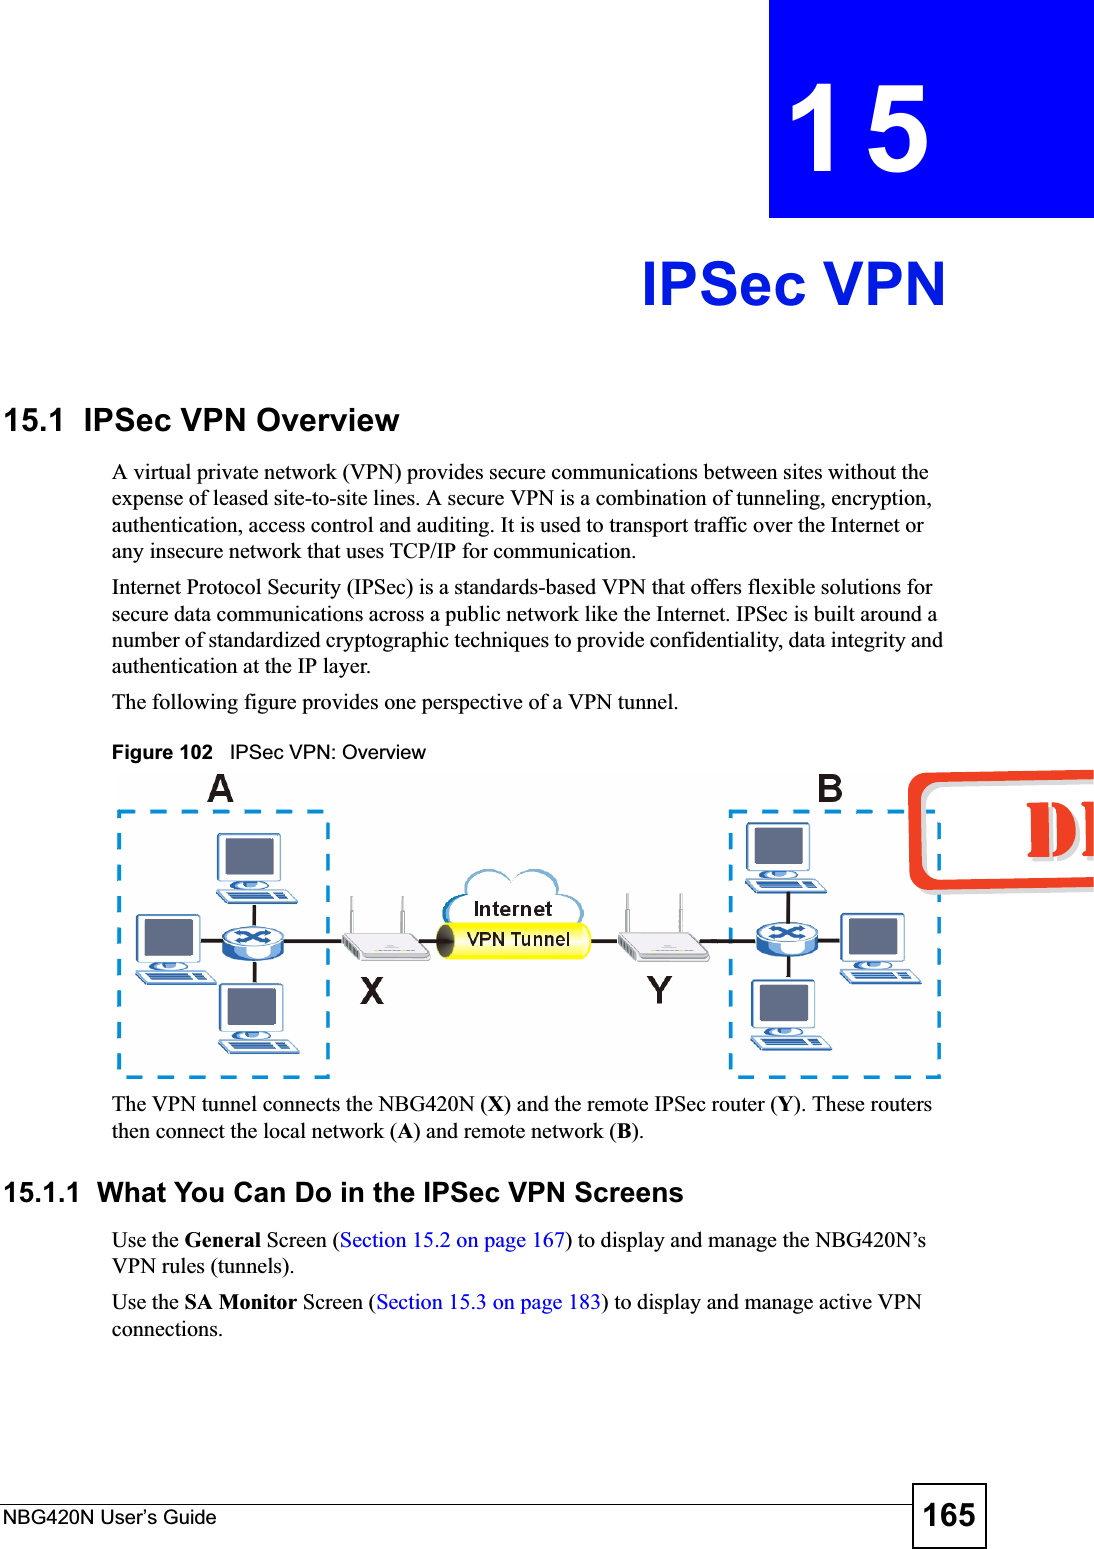 NBG420N User’s Guide 165CHAPTER 15IPSec VPN15.1  IPSec VPN OverviewA virtual private network (VPN) provides secure communications between sites without the expense of leased site-to-site lines. A secure VPN is a combination of tunneling, encryption, authentication, access control and auditing. It is used to transport traffic over the Internet or any insecure network that uses TCP/IP for communication.Internet Protocol Security (IPSec) is a standards-based VPN that offers flexible solutions for secure data communications across a public network like the Internet. IPSec is built around a number of standardized cryptographic techniques to provide confidentiality, data integrity and authentication at the IP layer.The following figure provides one perspective of a VPN tunnel.Figure 102   IPSec VPN: OverviewThe VPN tunnel connects the NBG420N (X) and the remote IPSec router (Y). These routers then connect the local network (A) and remote network (B).15.1.1  What You Can Do in the IPSec VPN ScreensUse the General Screen (Section 15.2 on page 167) to display and manage the NBG420N’s VPN rules (tunnels).Use the SA Monitor Screen (Section 15.3 on page 183) to display and manage active VPN connections.